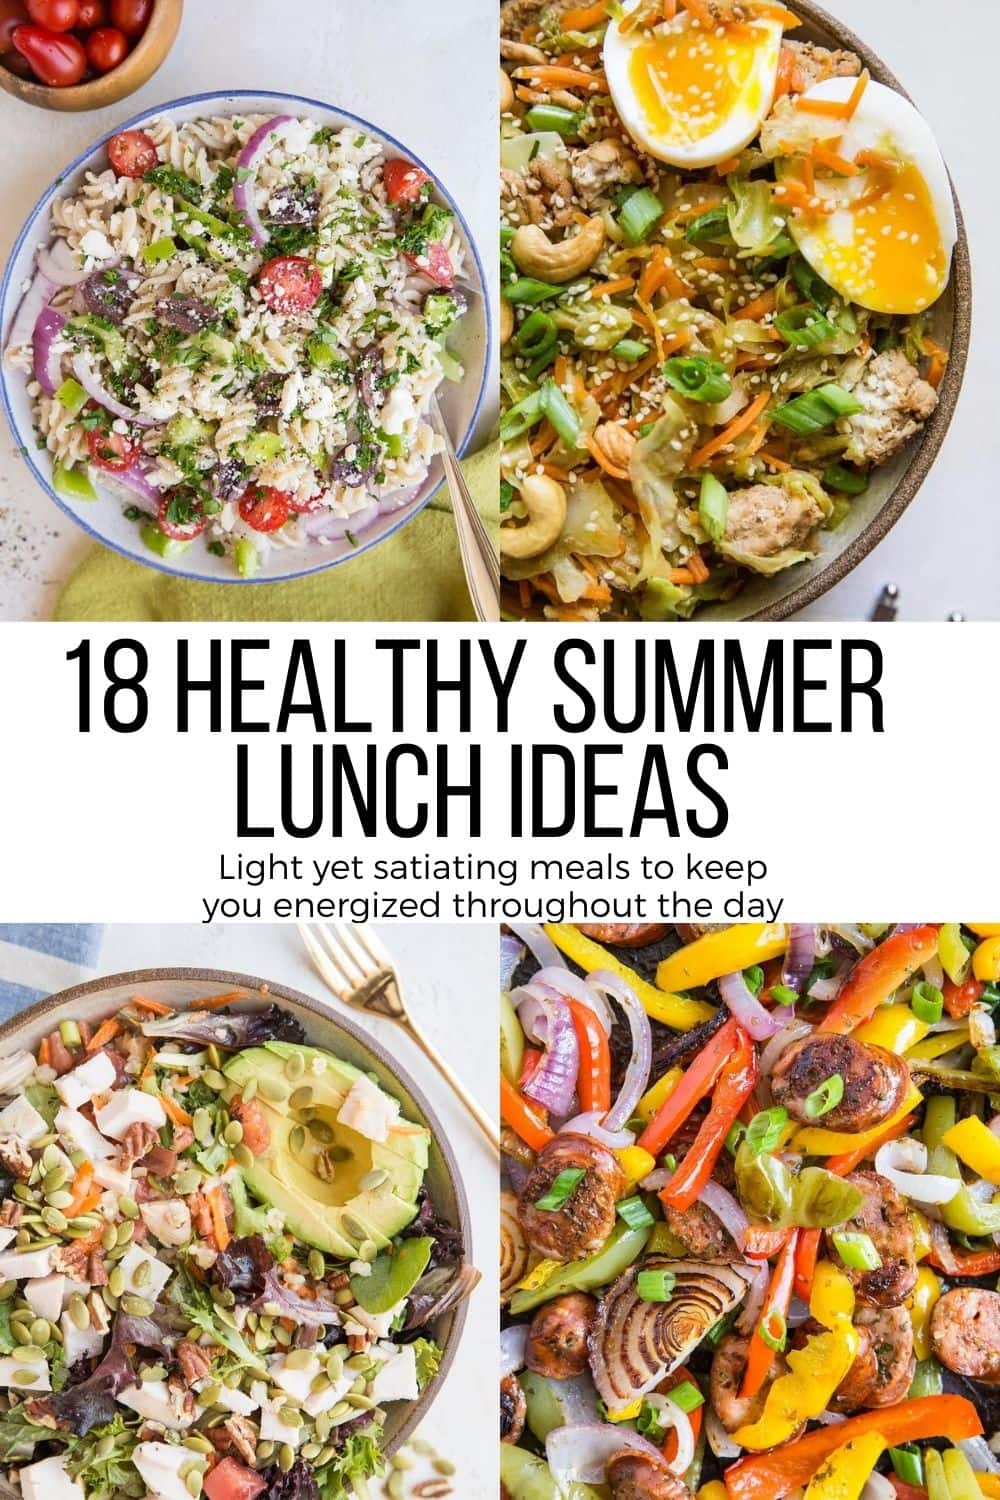 Forsømme Potentiel Brig 18 Healthy Summer Lunch Ideas - The Roasted Root